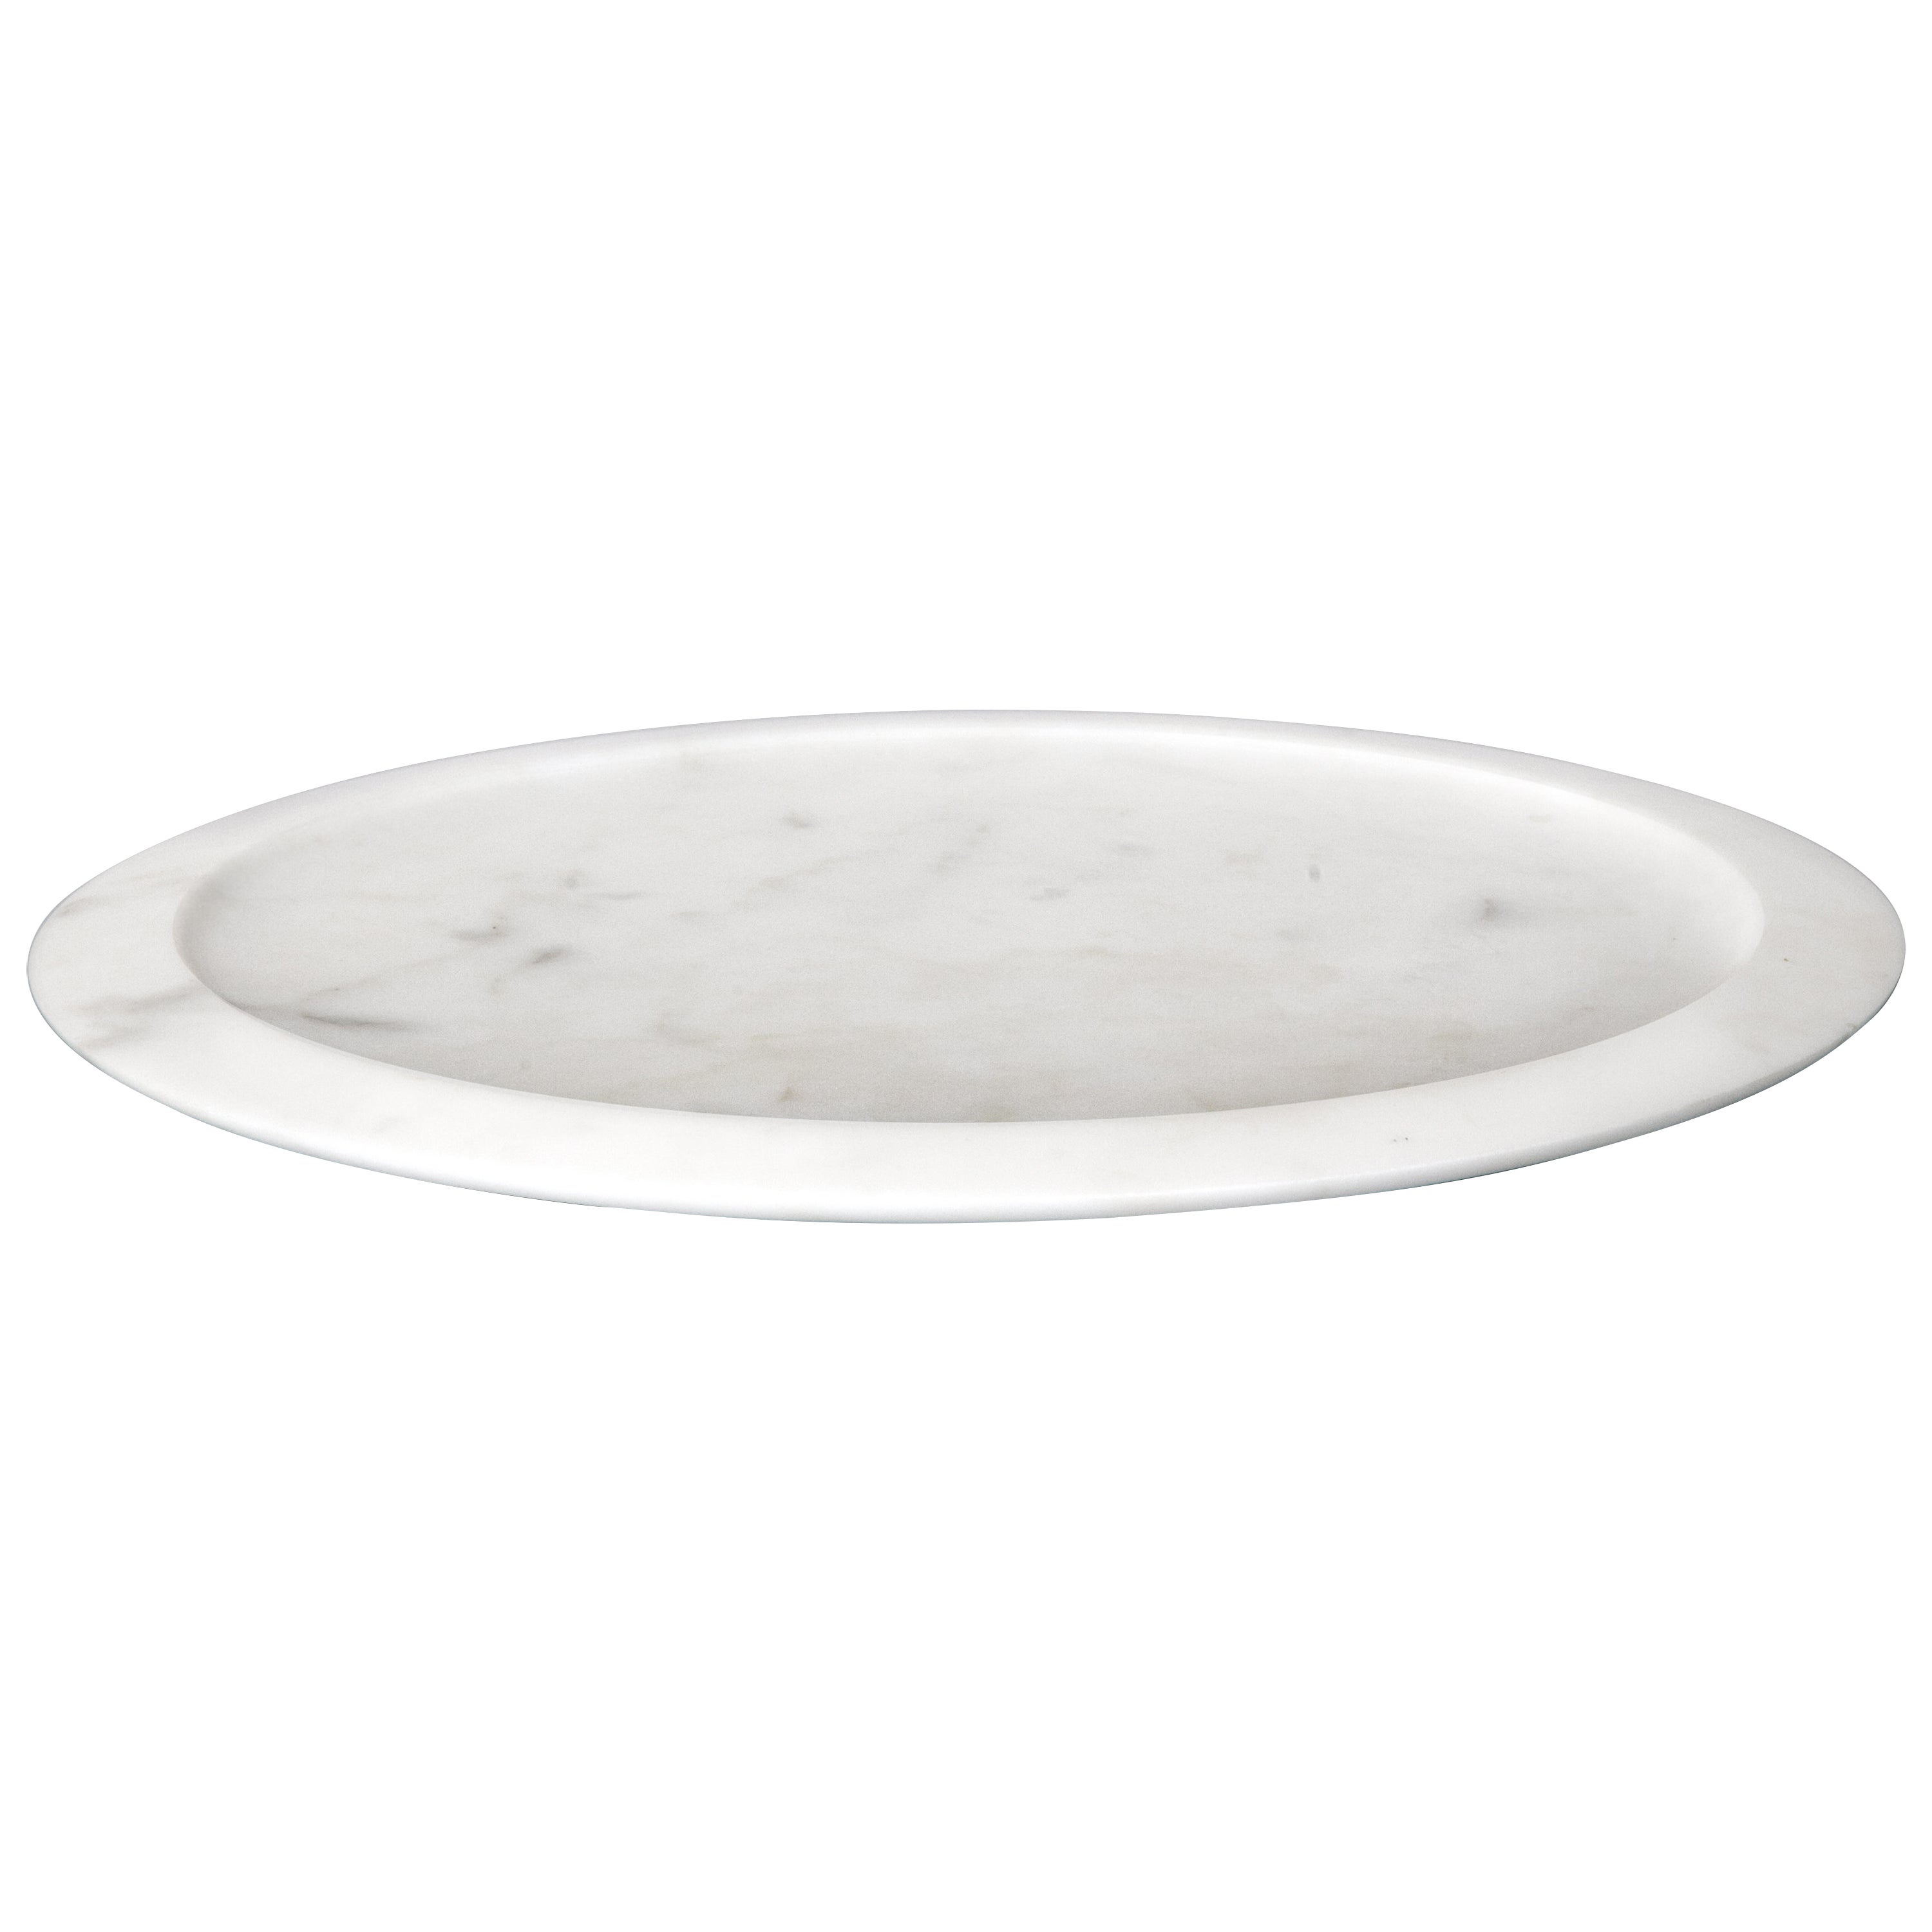 Nysiros Serving Plate, White by Ivan Colominas